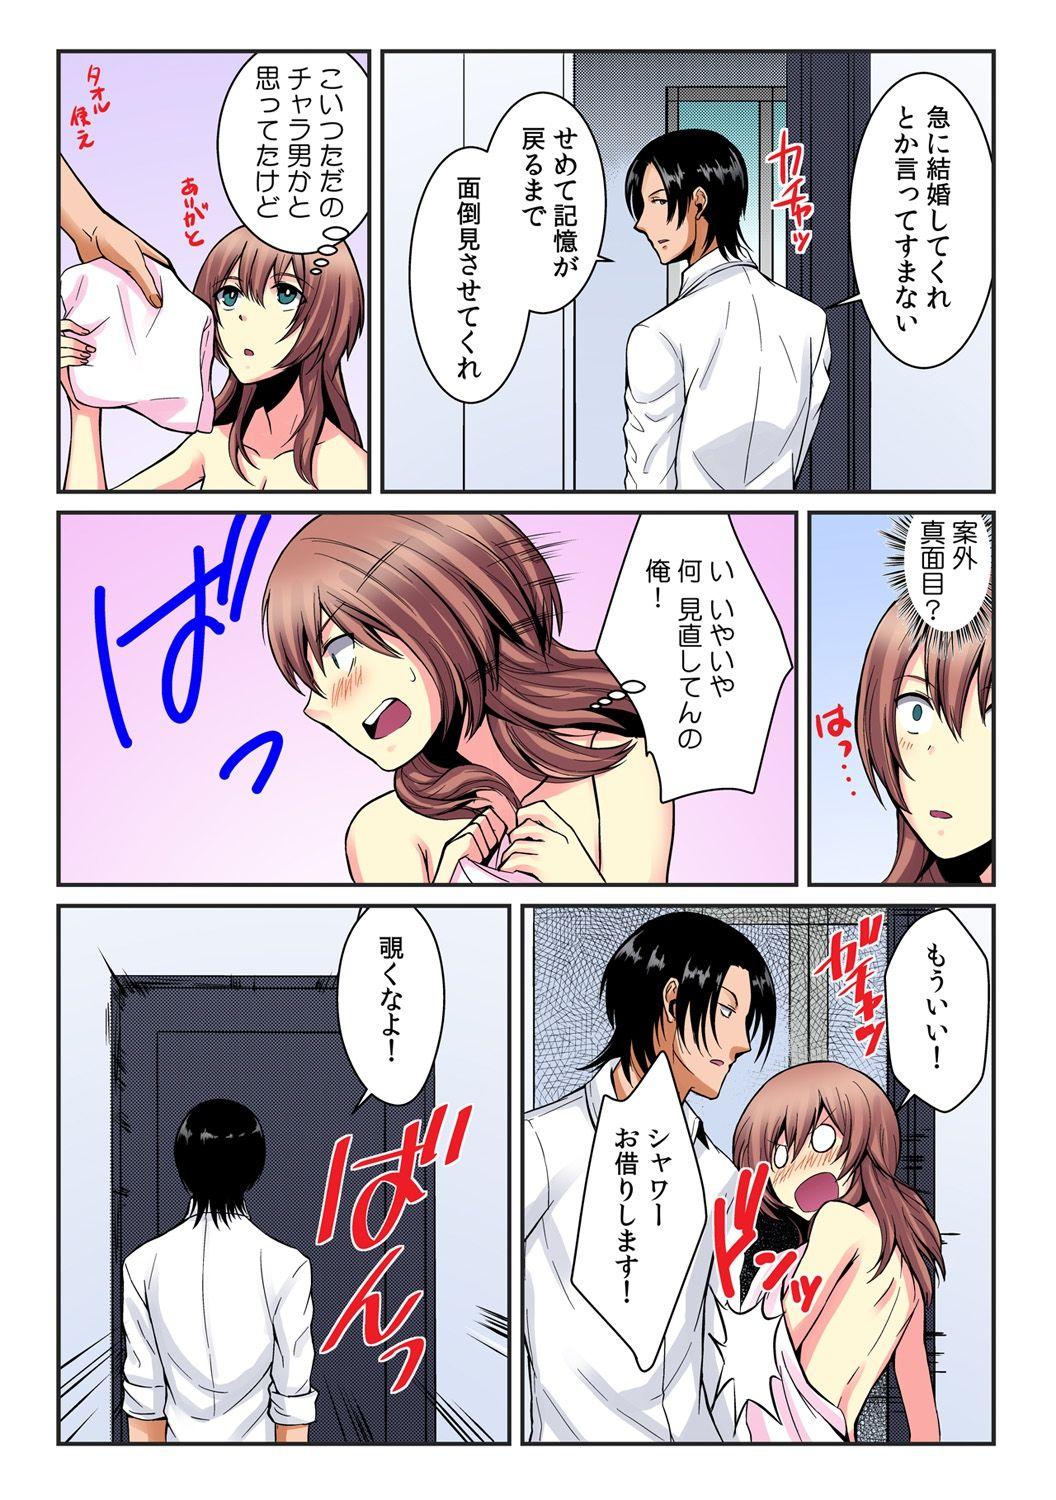 [Akagi Gijou / Akahige] I became a girl- and I definitely can't let anyone find out! (Full color) 1 24